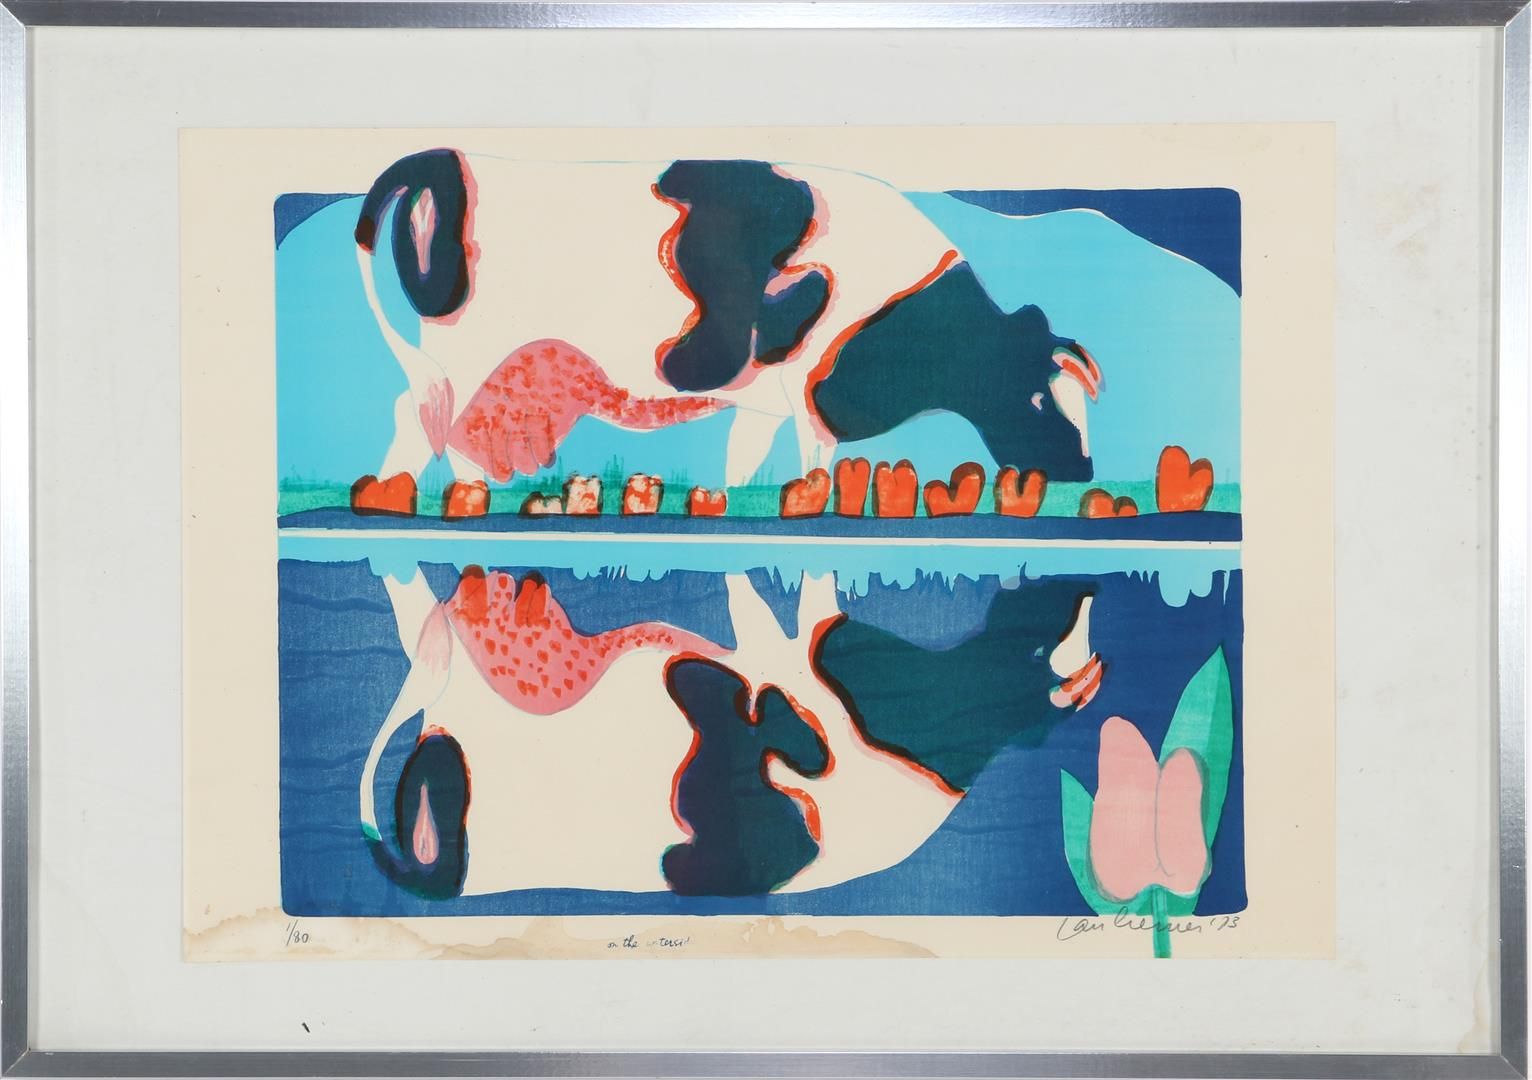 Jan Cremer Jan Cremer (1940-)

On the watersite, color lithograph from 1973, 1/8&hellip;